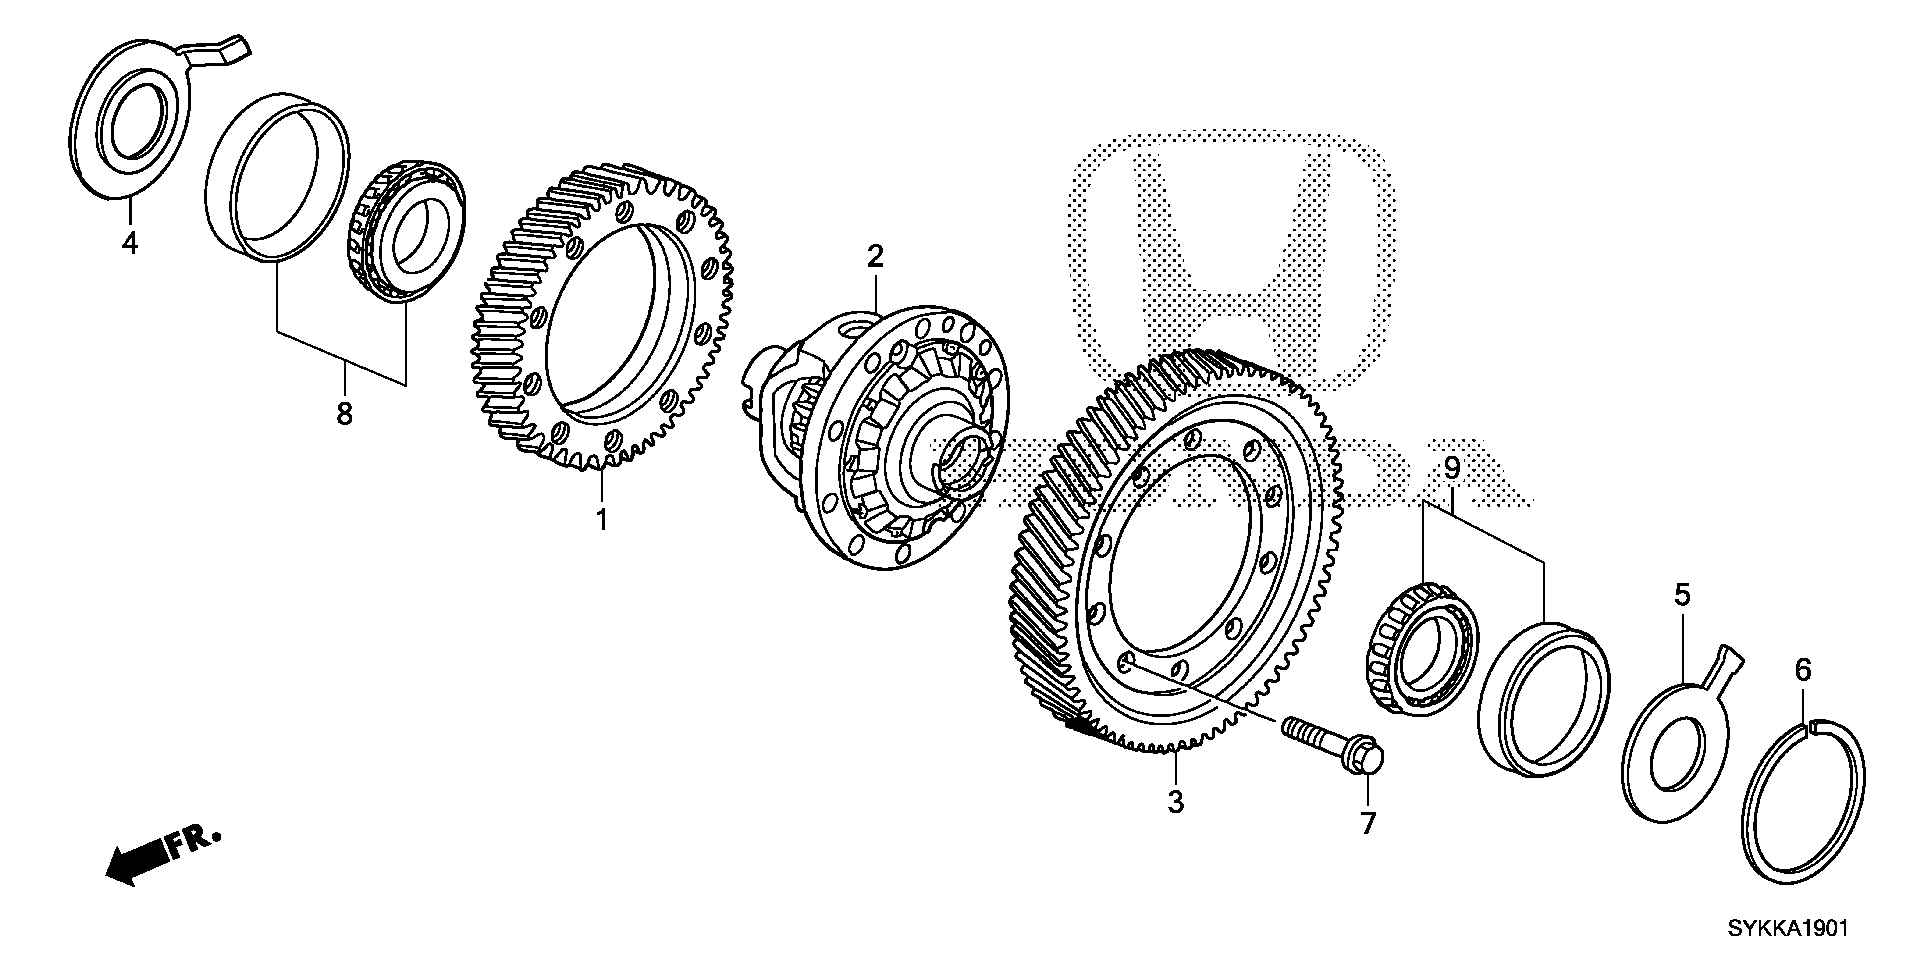 DIFFERENTIAL(4WD)(L4)